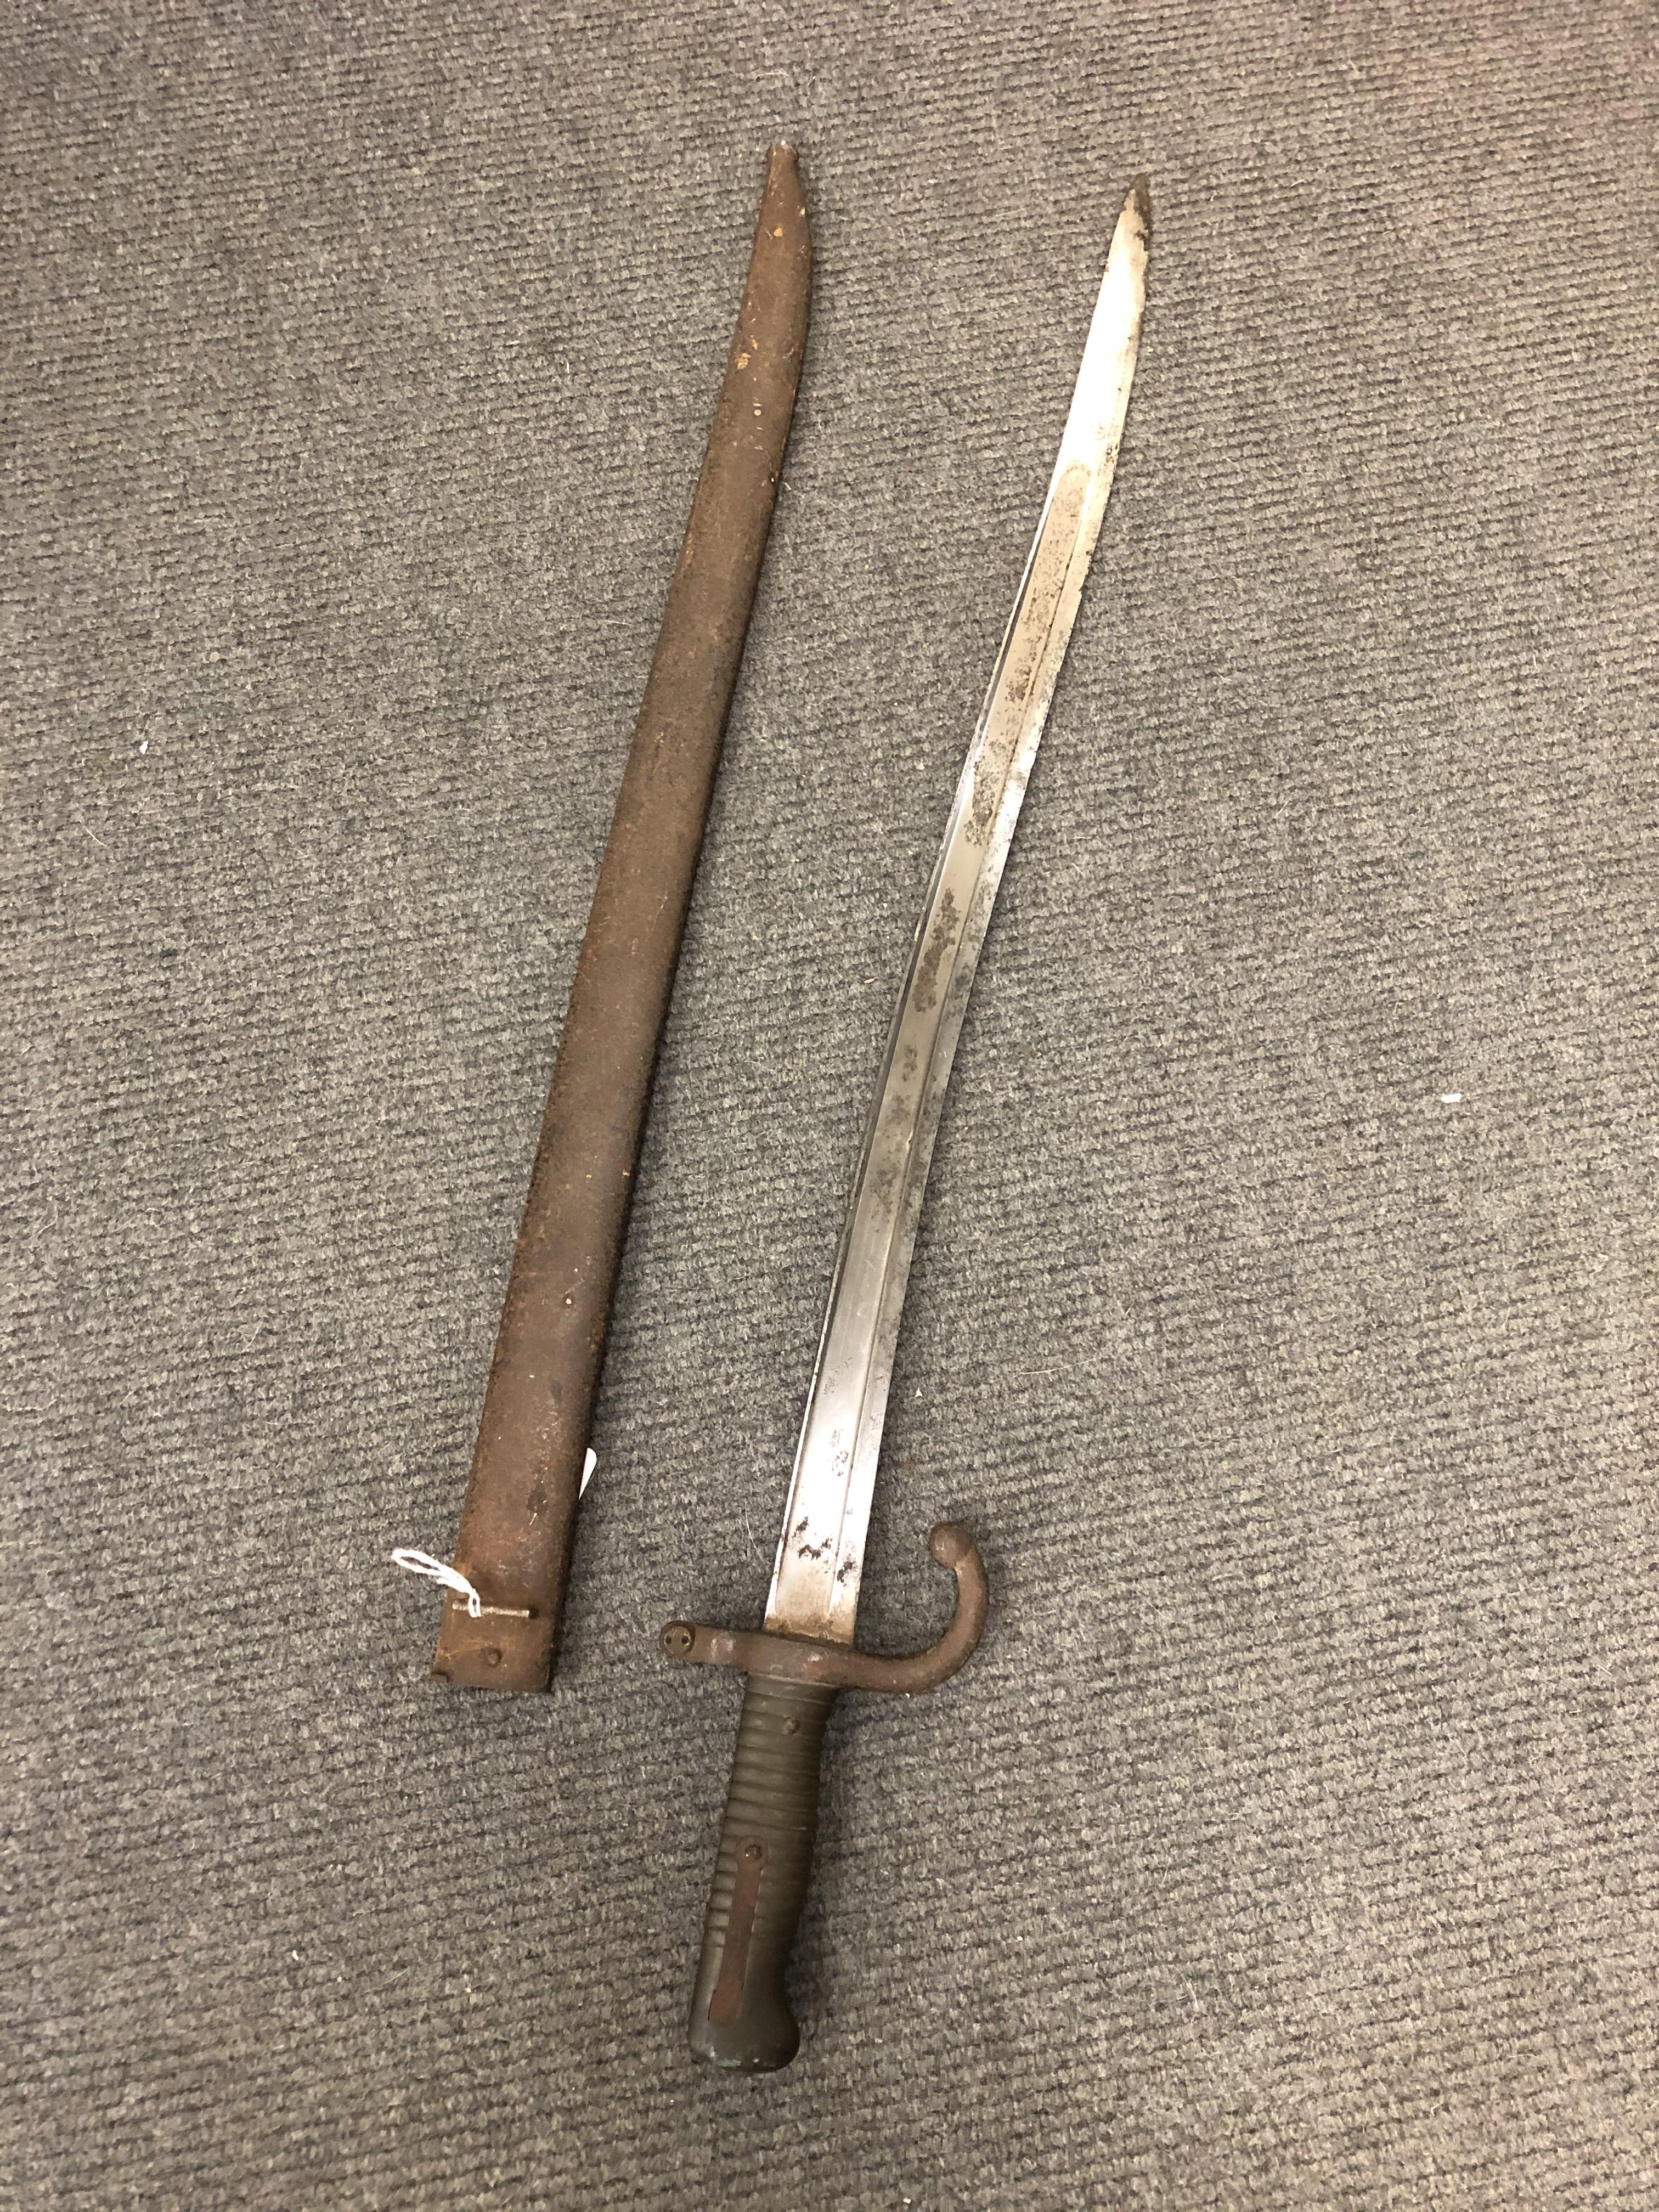 A French 1866 Chassepot bayonet in scabbard